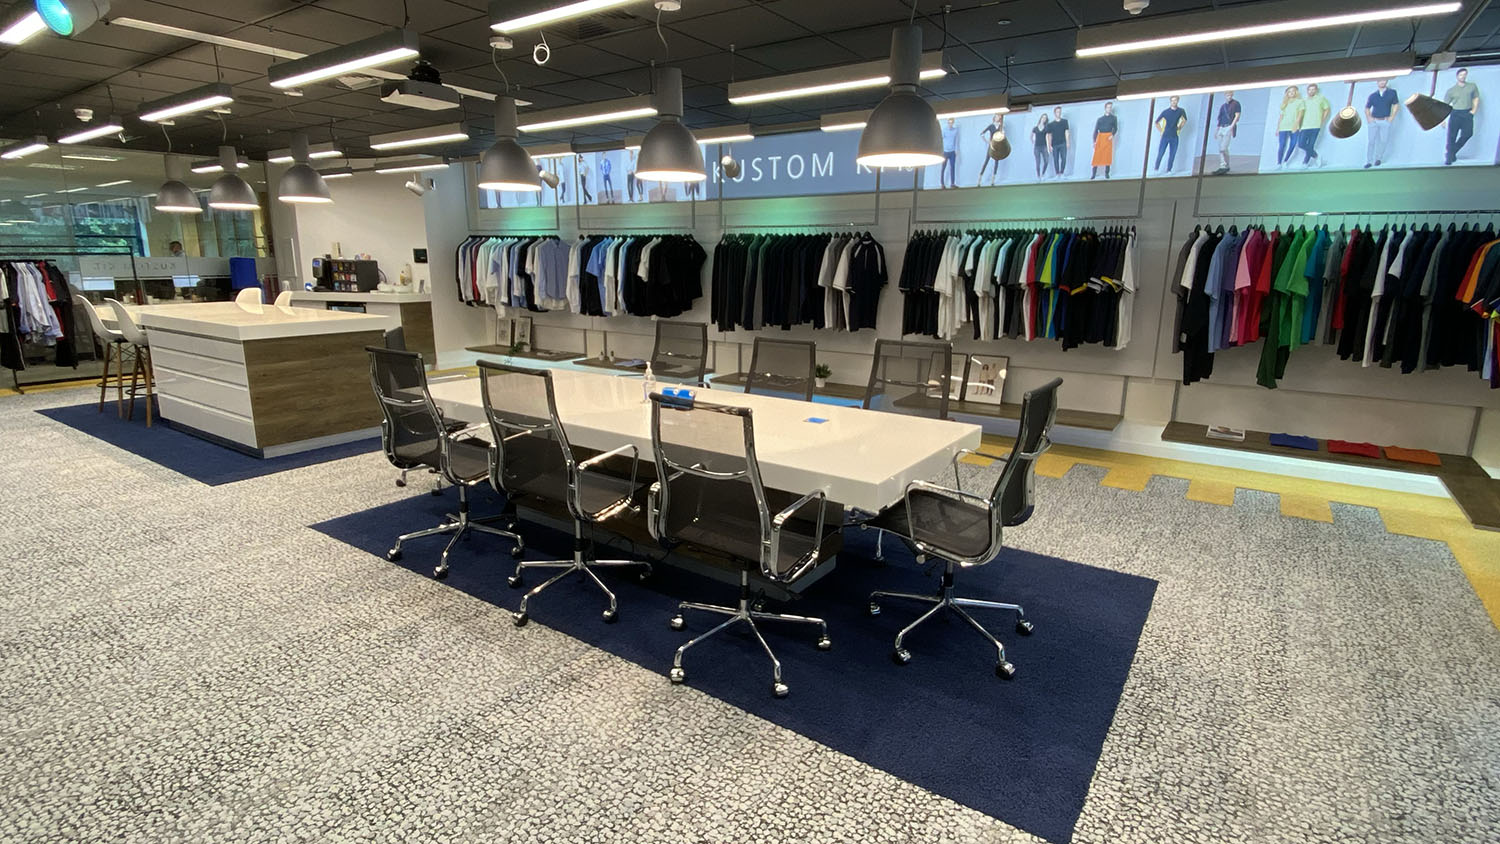 The fastr office with sample clothing on display